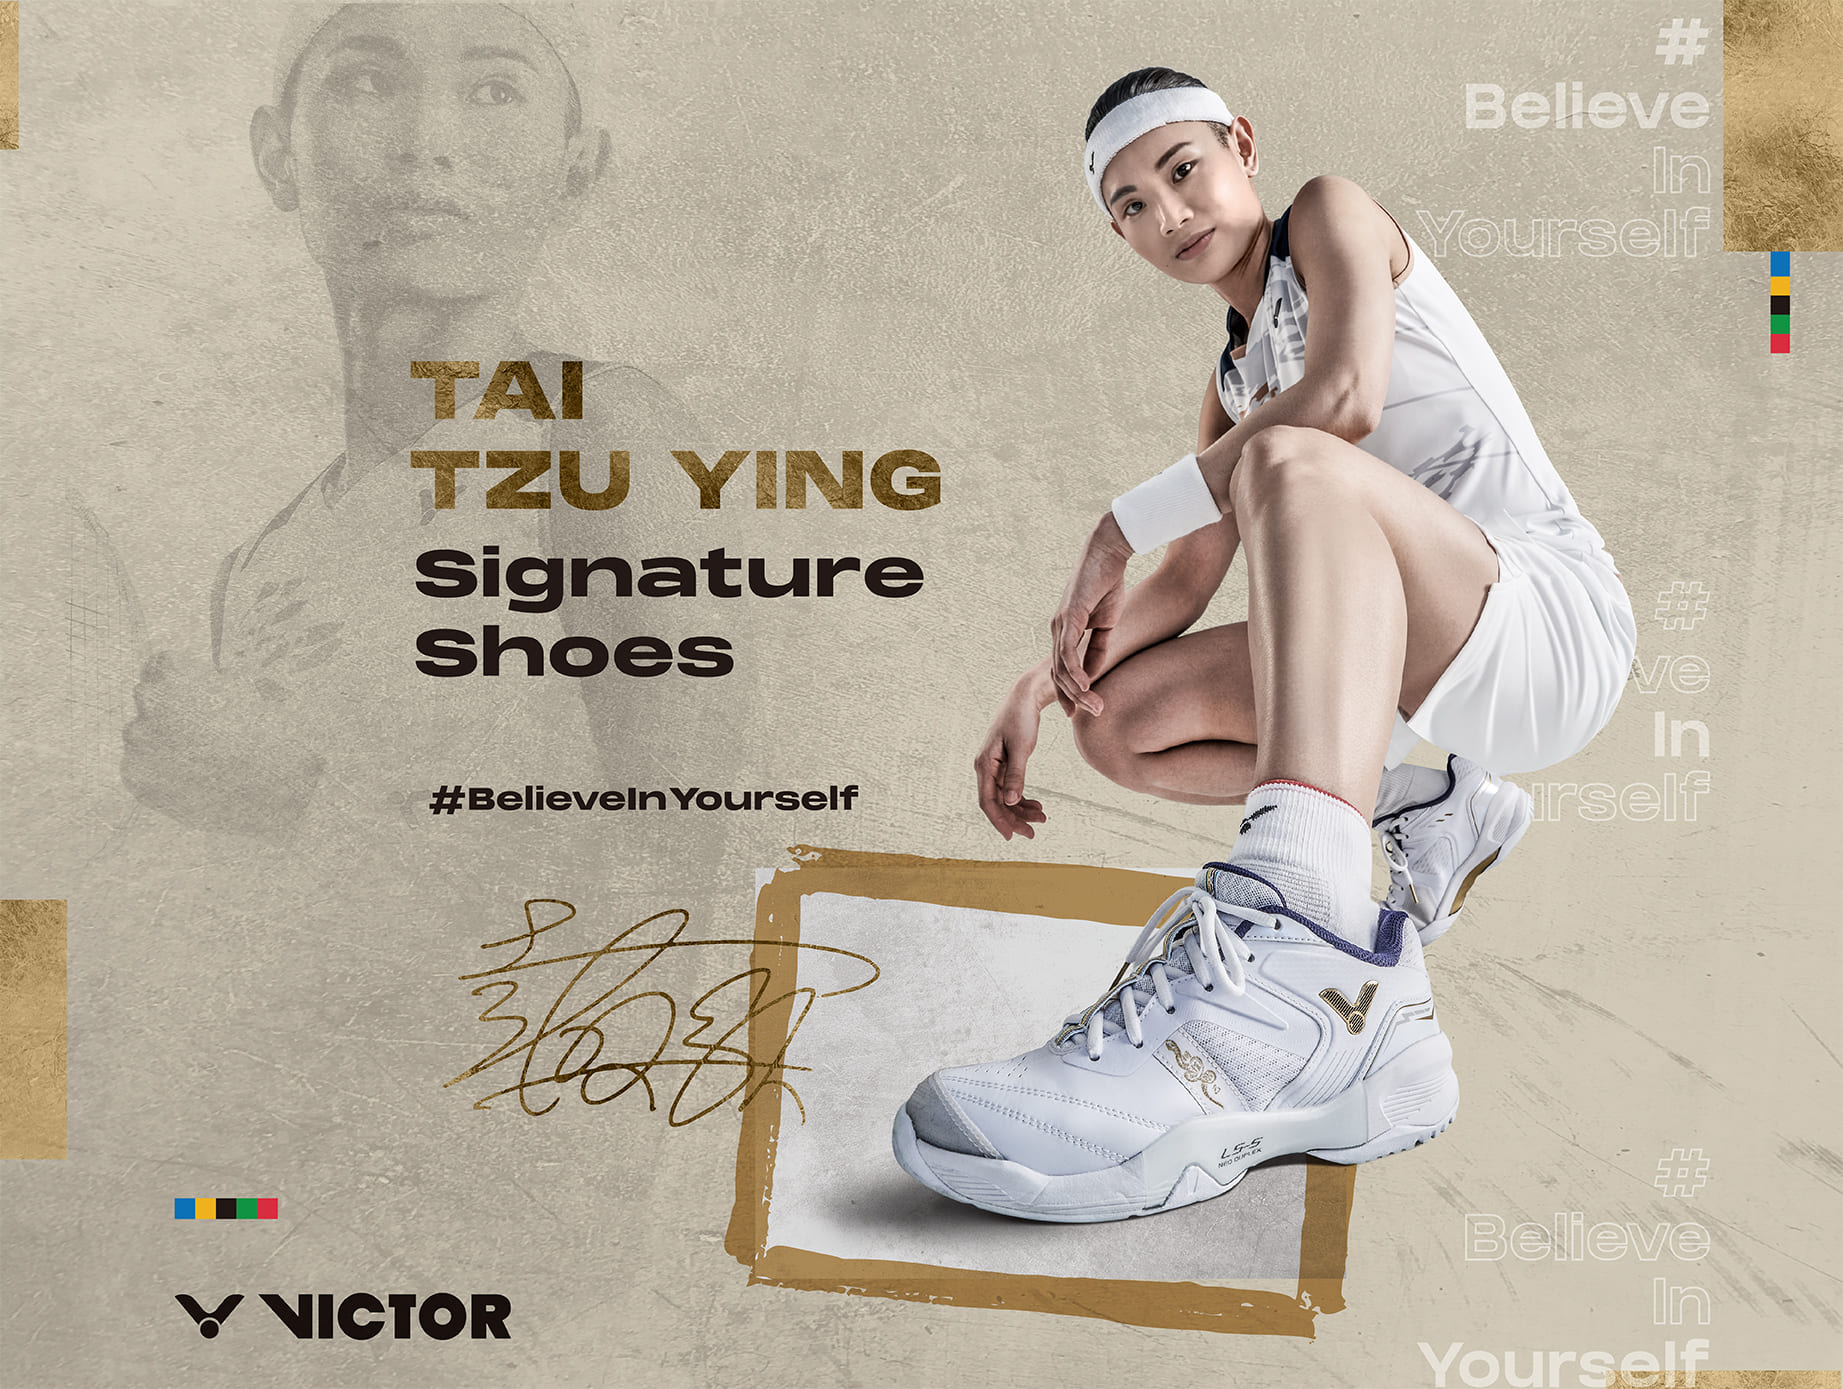 VICTOR Announces Grand Launch of Tai Tzu Ying Signature Collection